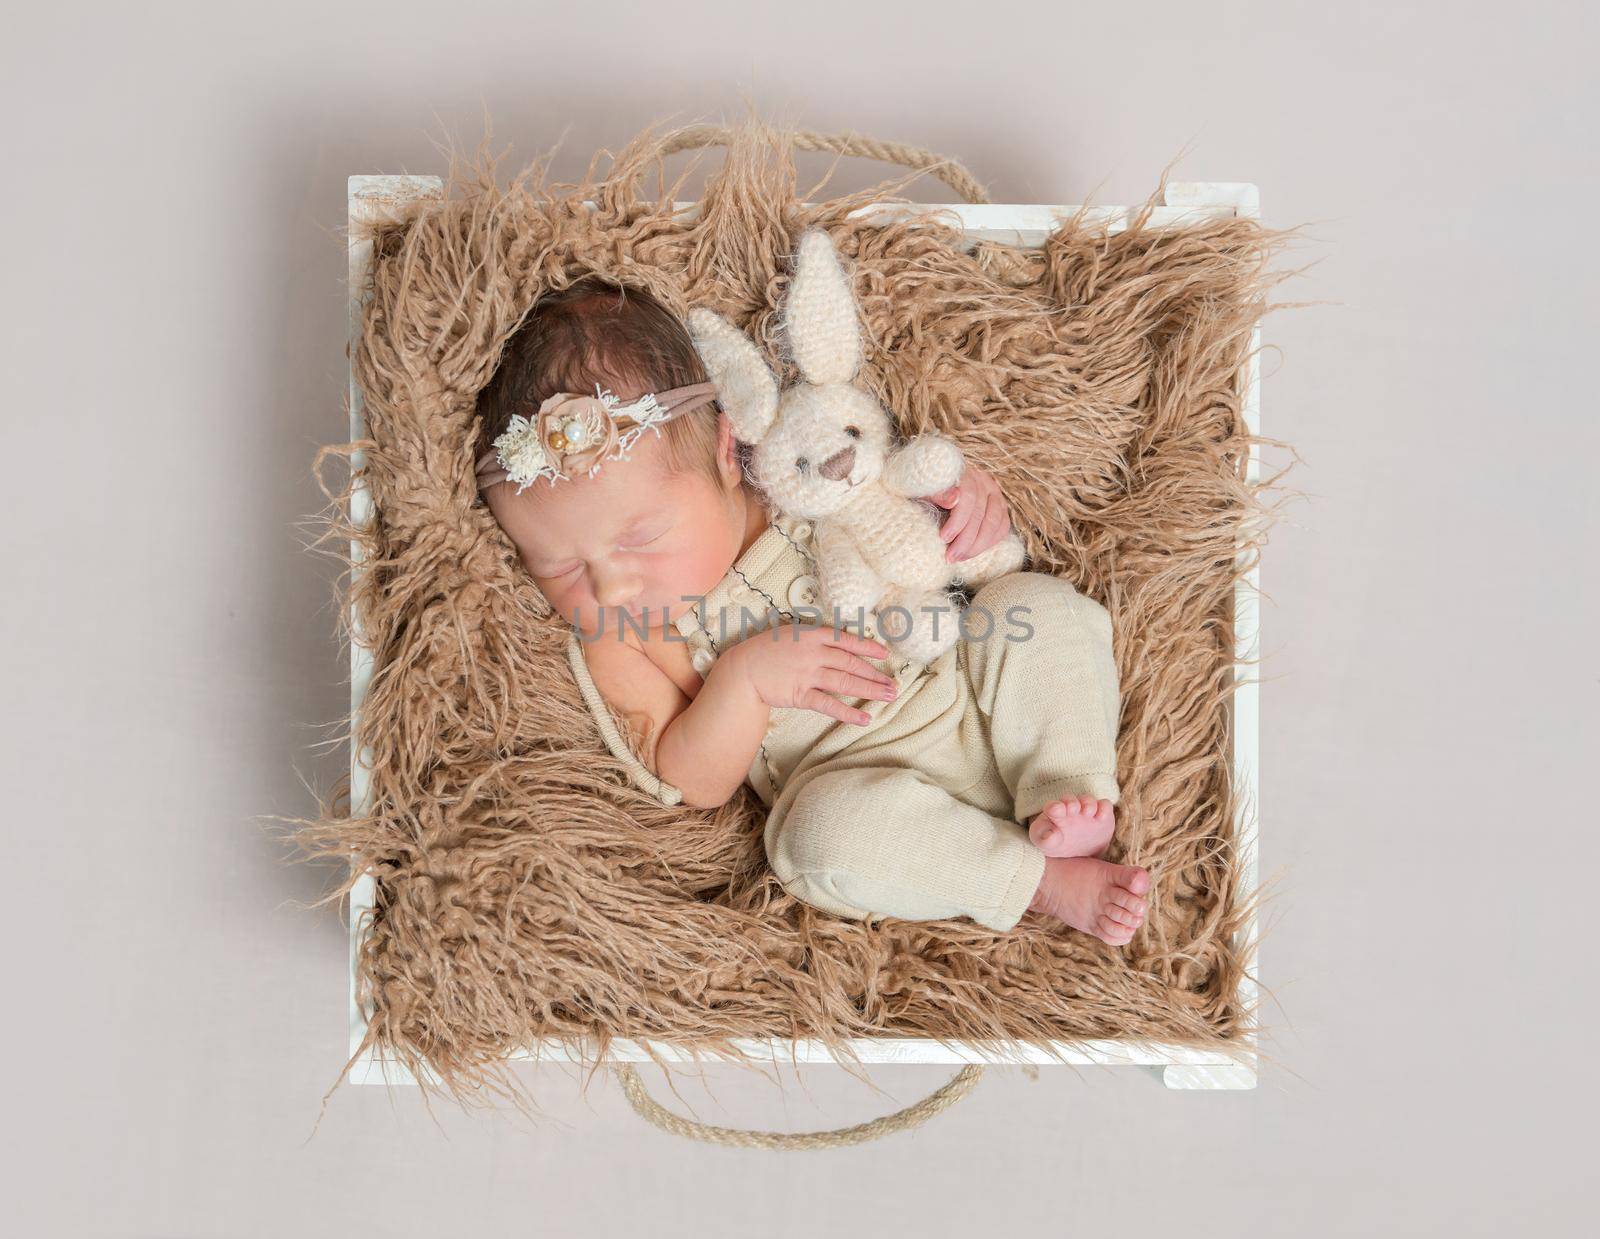 Adorable child napping on her back with a lovely rabbit toy, in a basket, topview